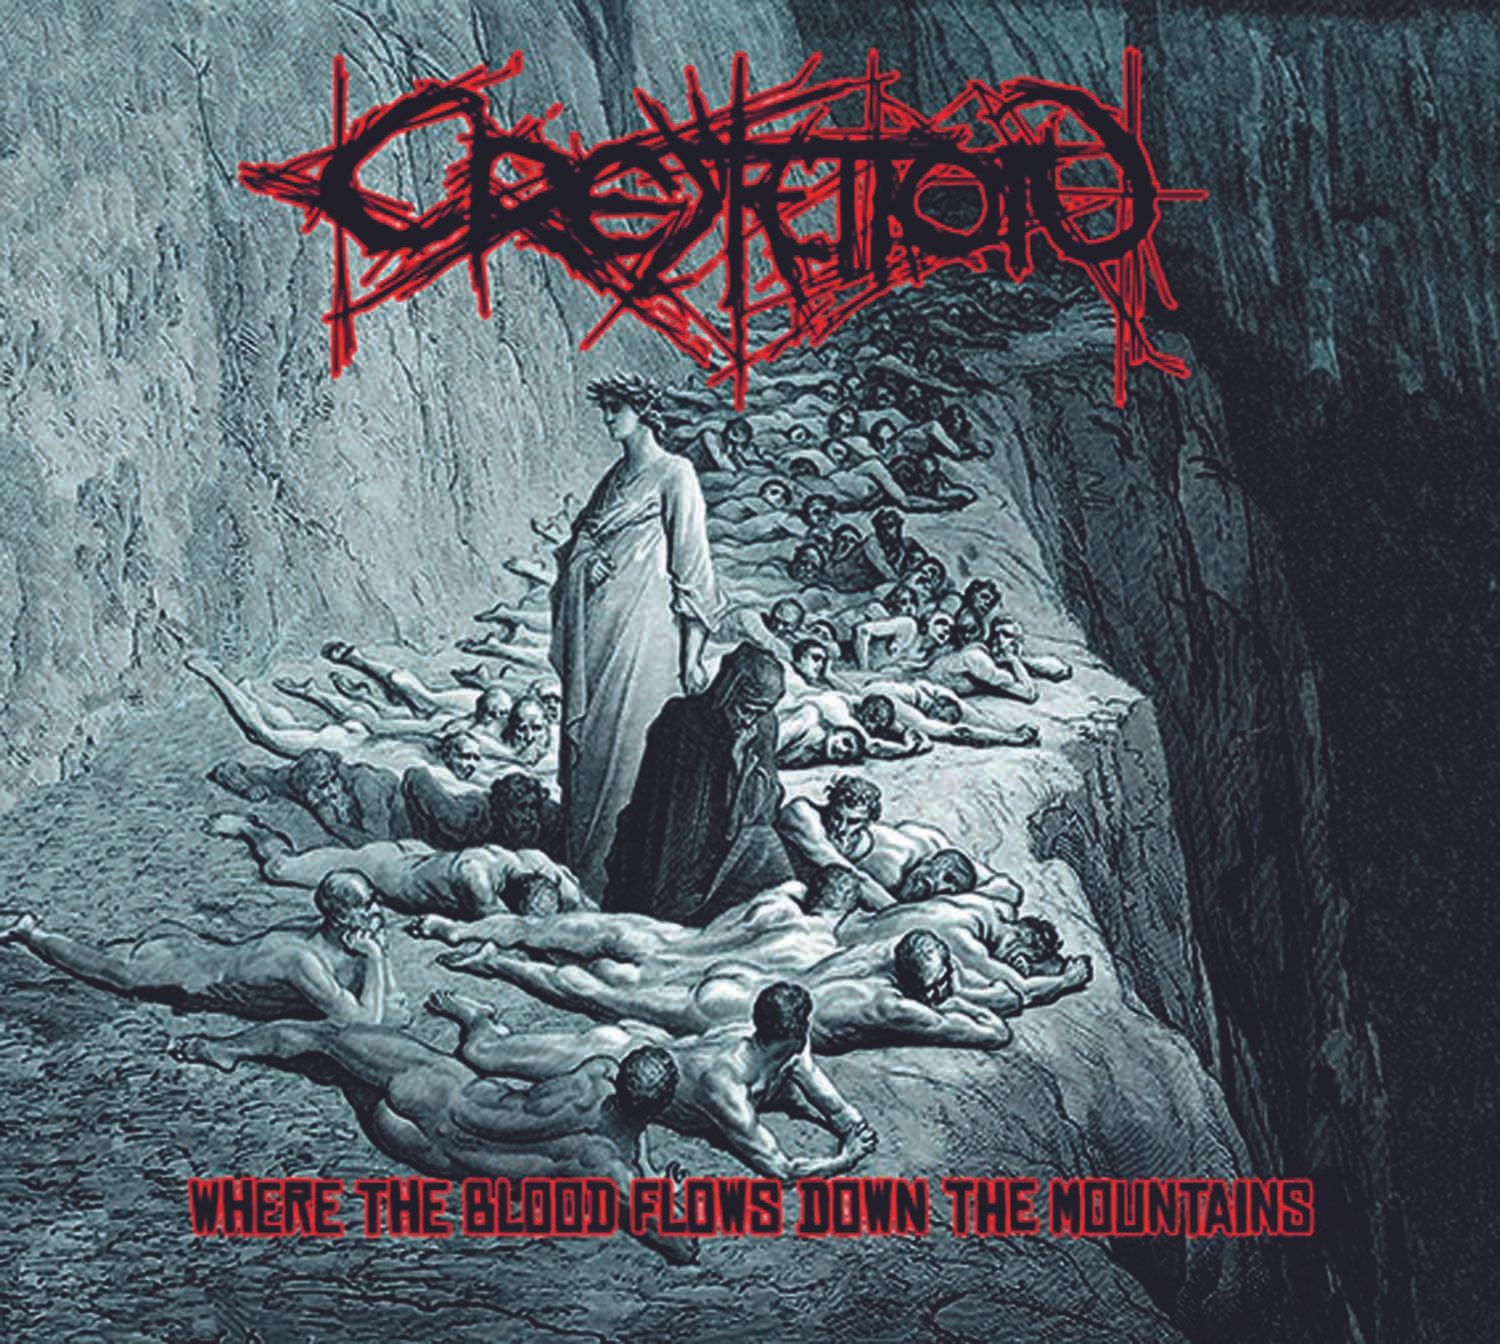 Cremation - Where The Blood Flows Down The Mountains